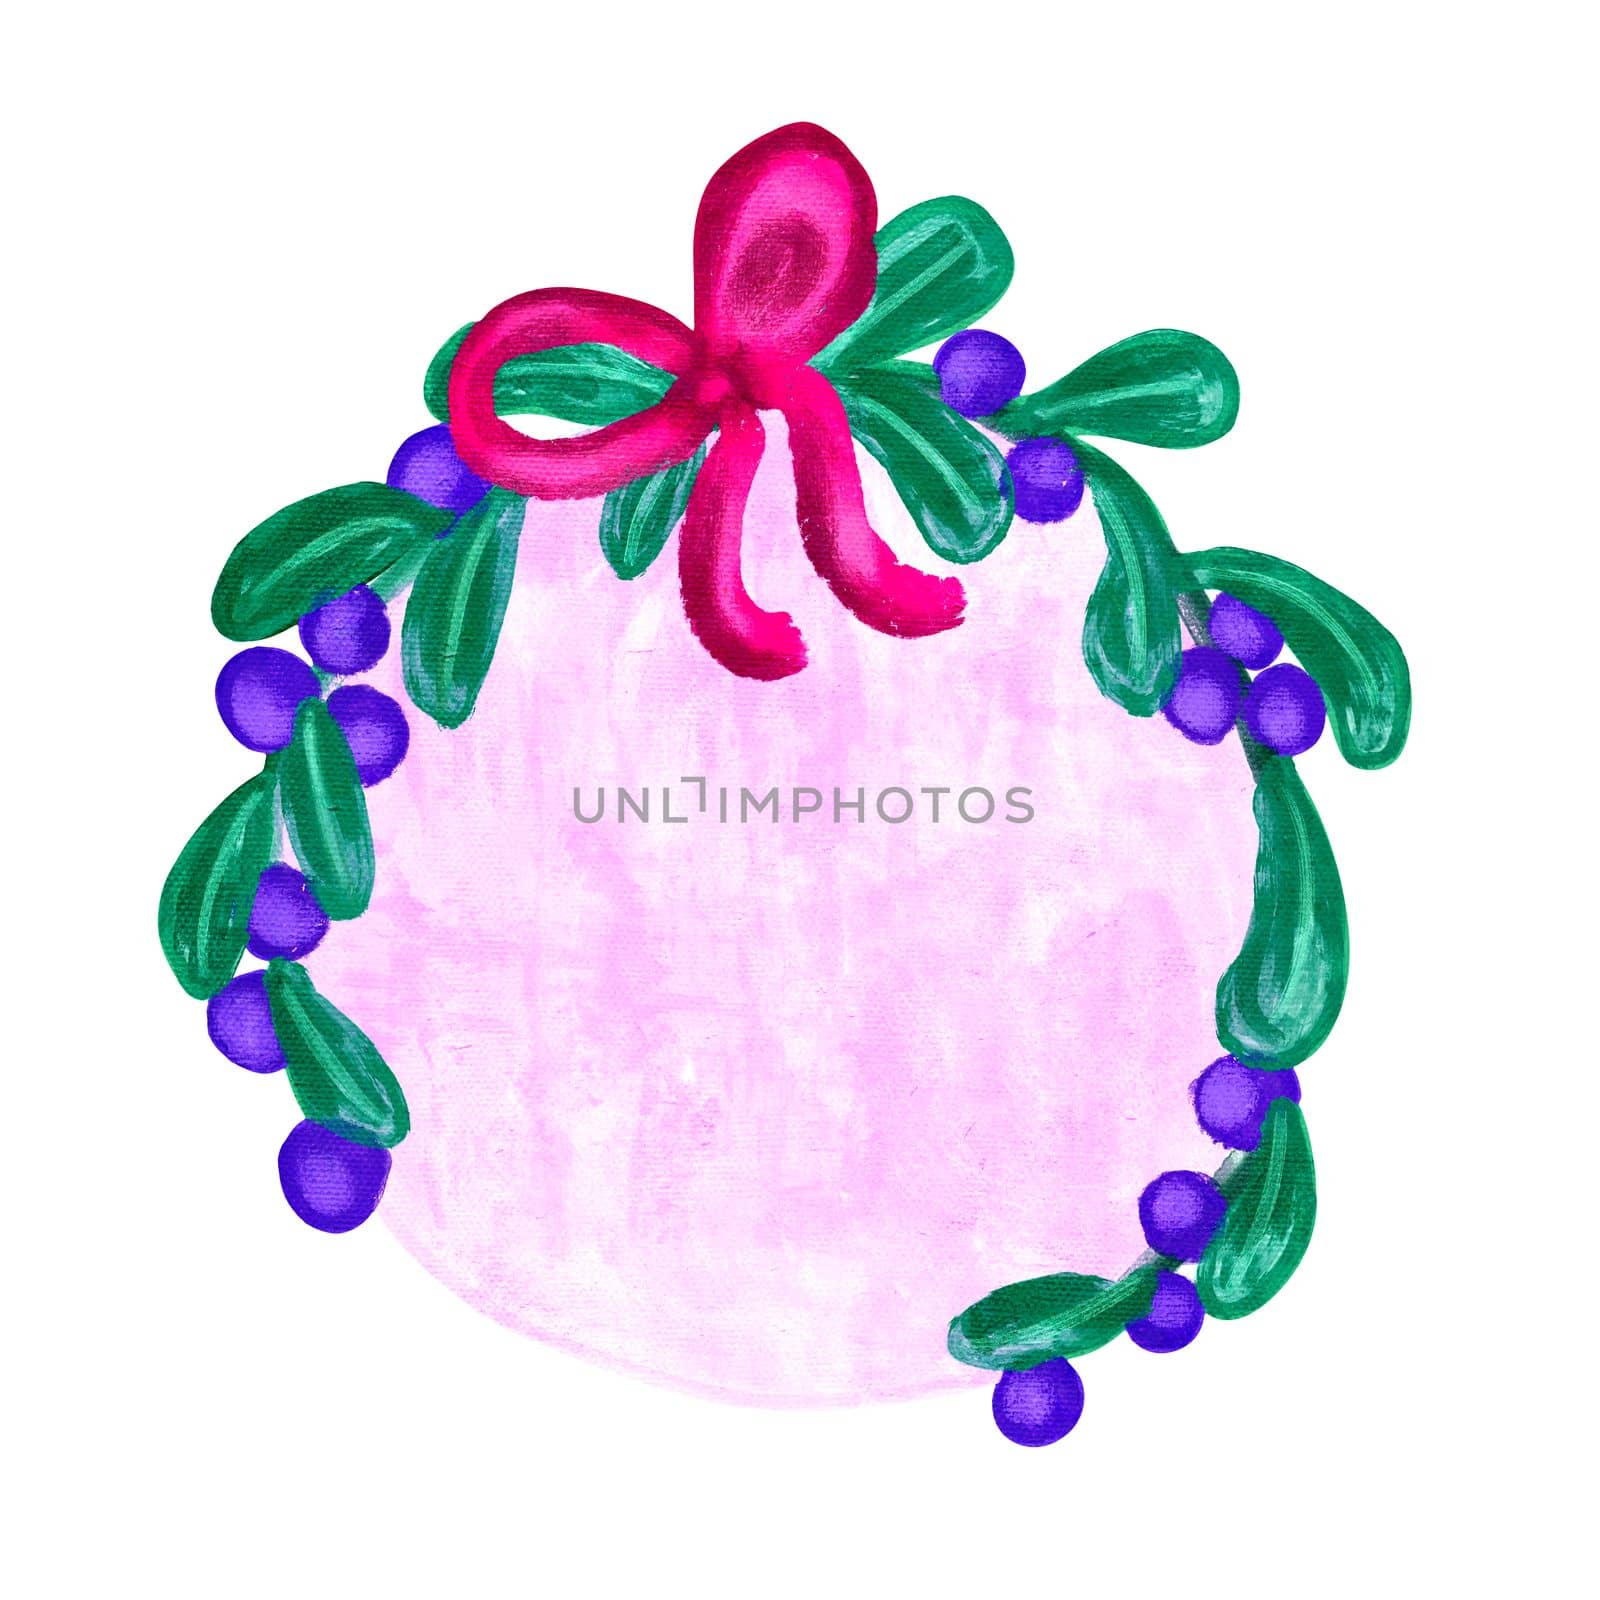 Hand drawn illustration of christmas mistletoe shape frame with leaves ribbon bow on pink background. Oil paint texture, winter december invitation poster holiday decor, painterly loose brushstrokes greeting design